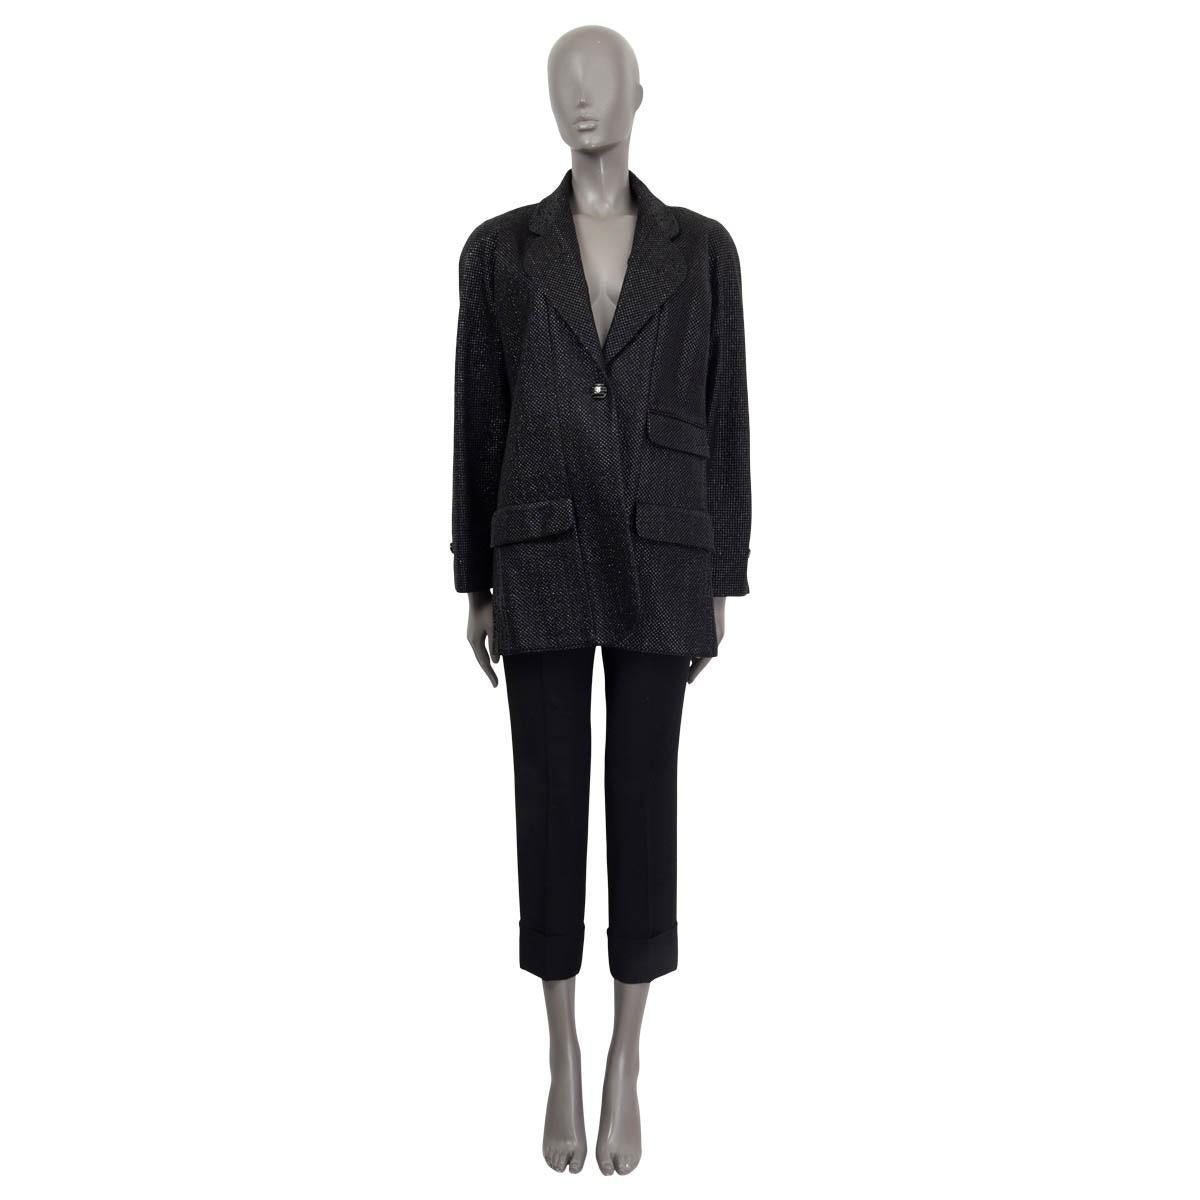 100% authentic Chanel single breasted one button blazer with round notch lapel in black shiny net fabric (viscose 60%), silk (25%) and polyester (15%) with classic logo printed black lining silck (100%) and gunmetal chain on the inside hemline.